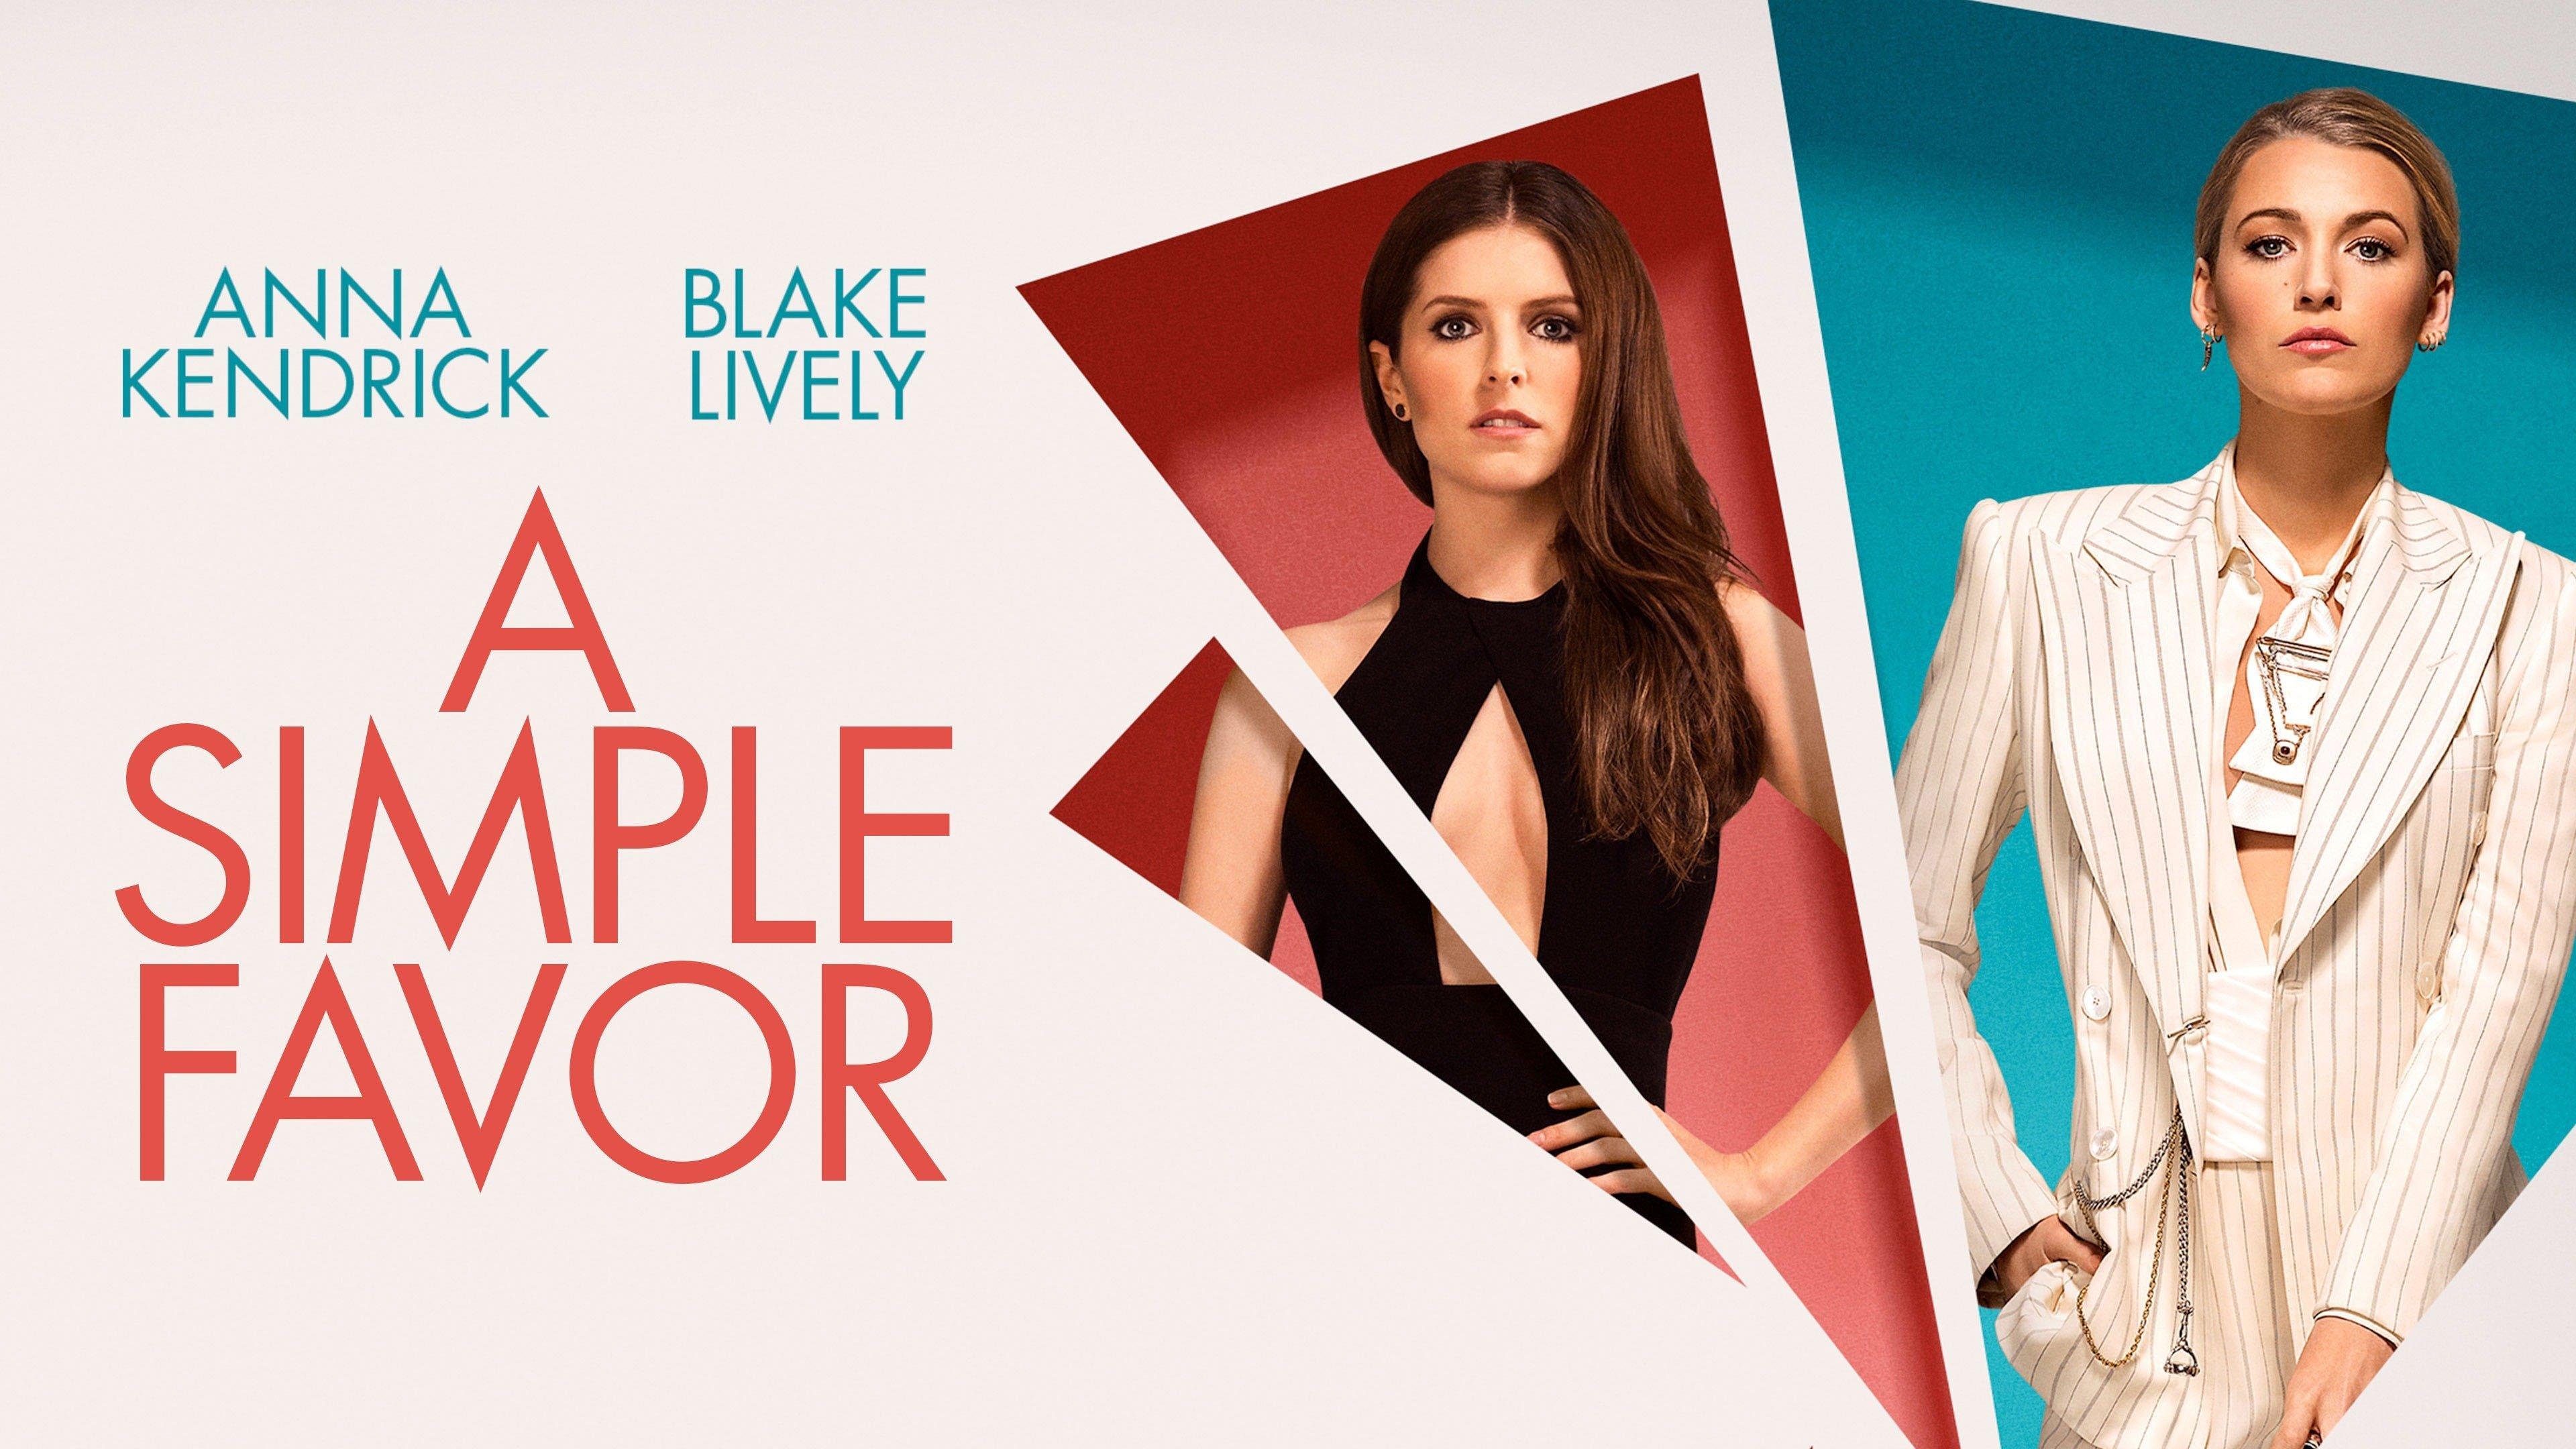 Watch A Simple Favor Streaming Online on Philo (Free Trial)